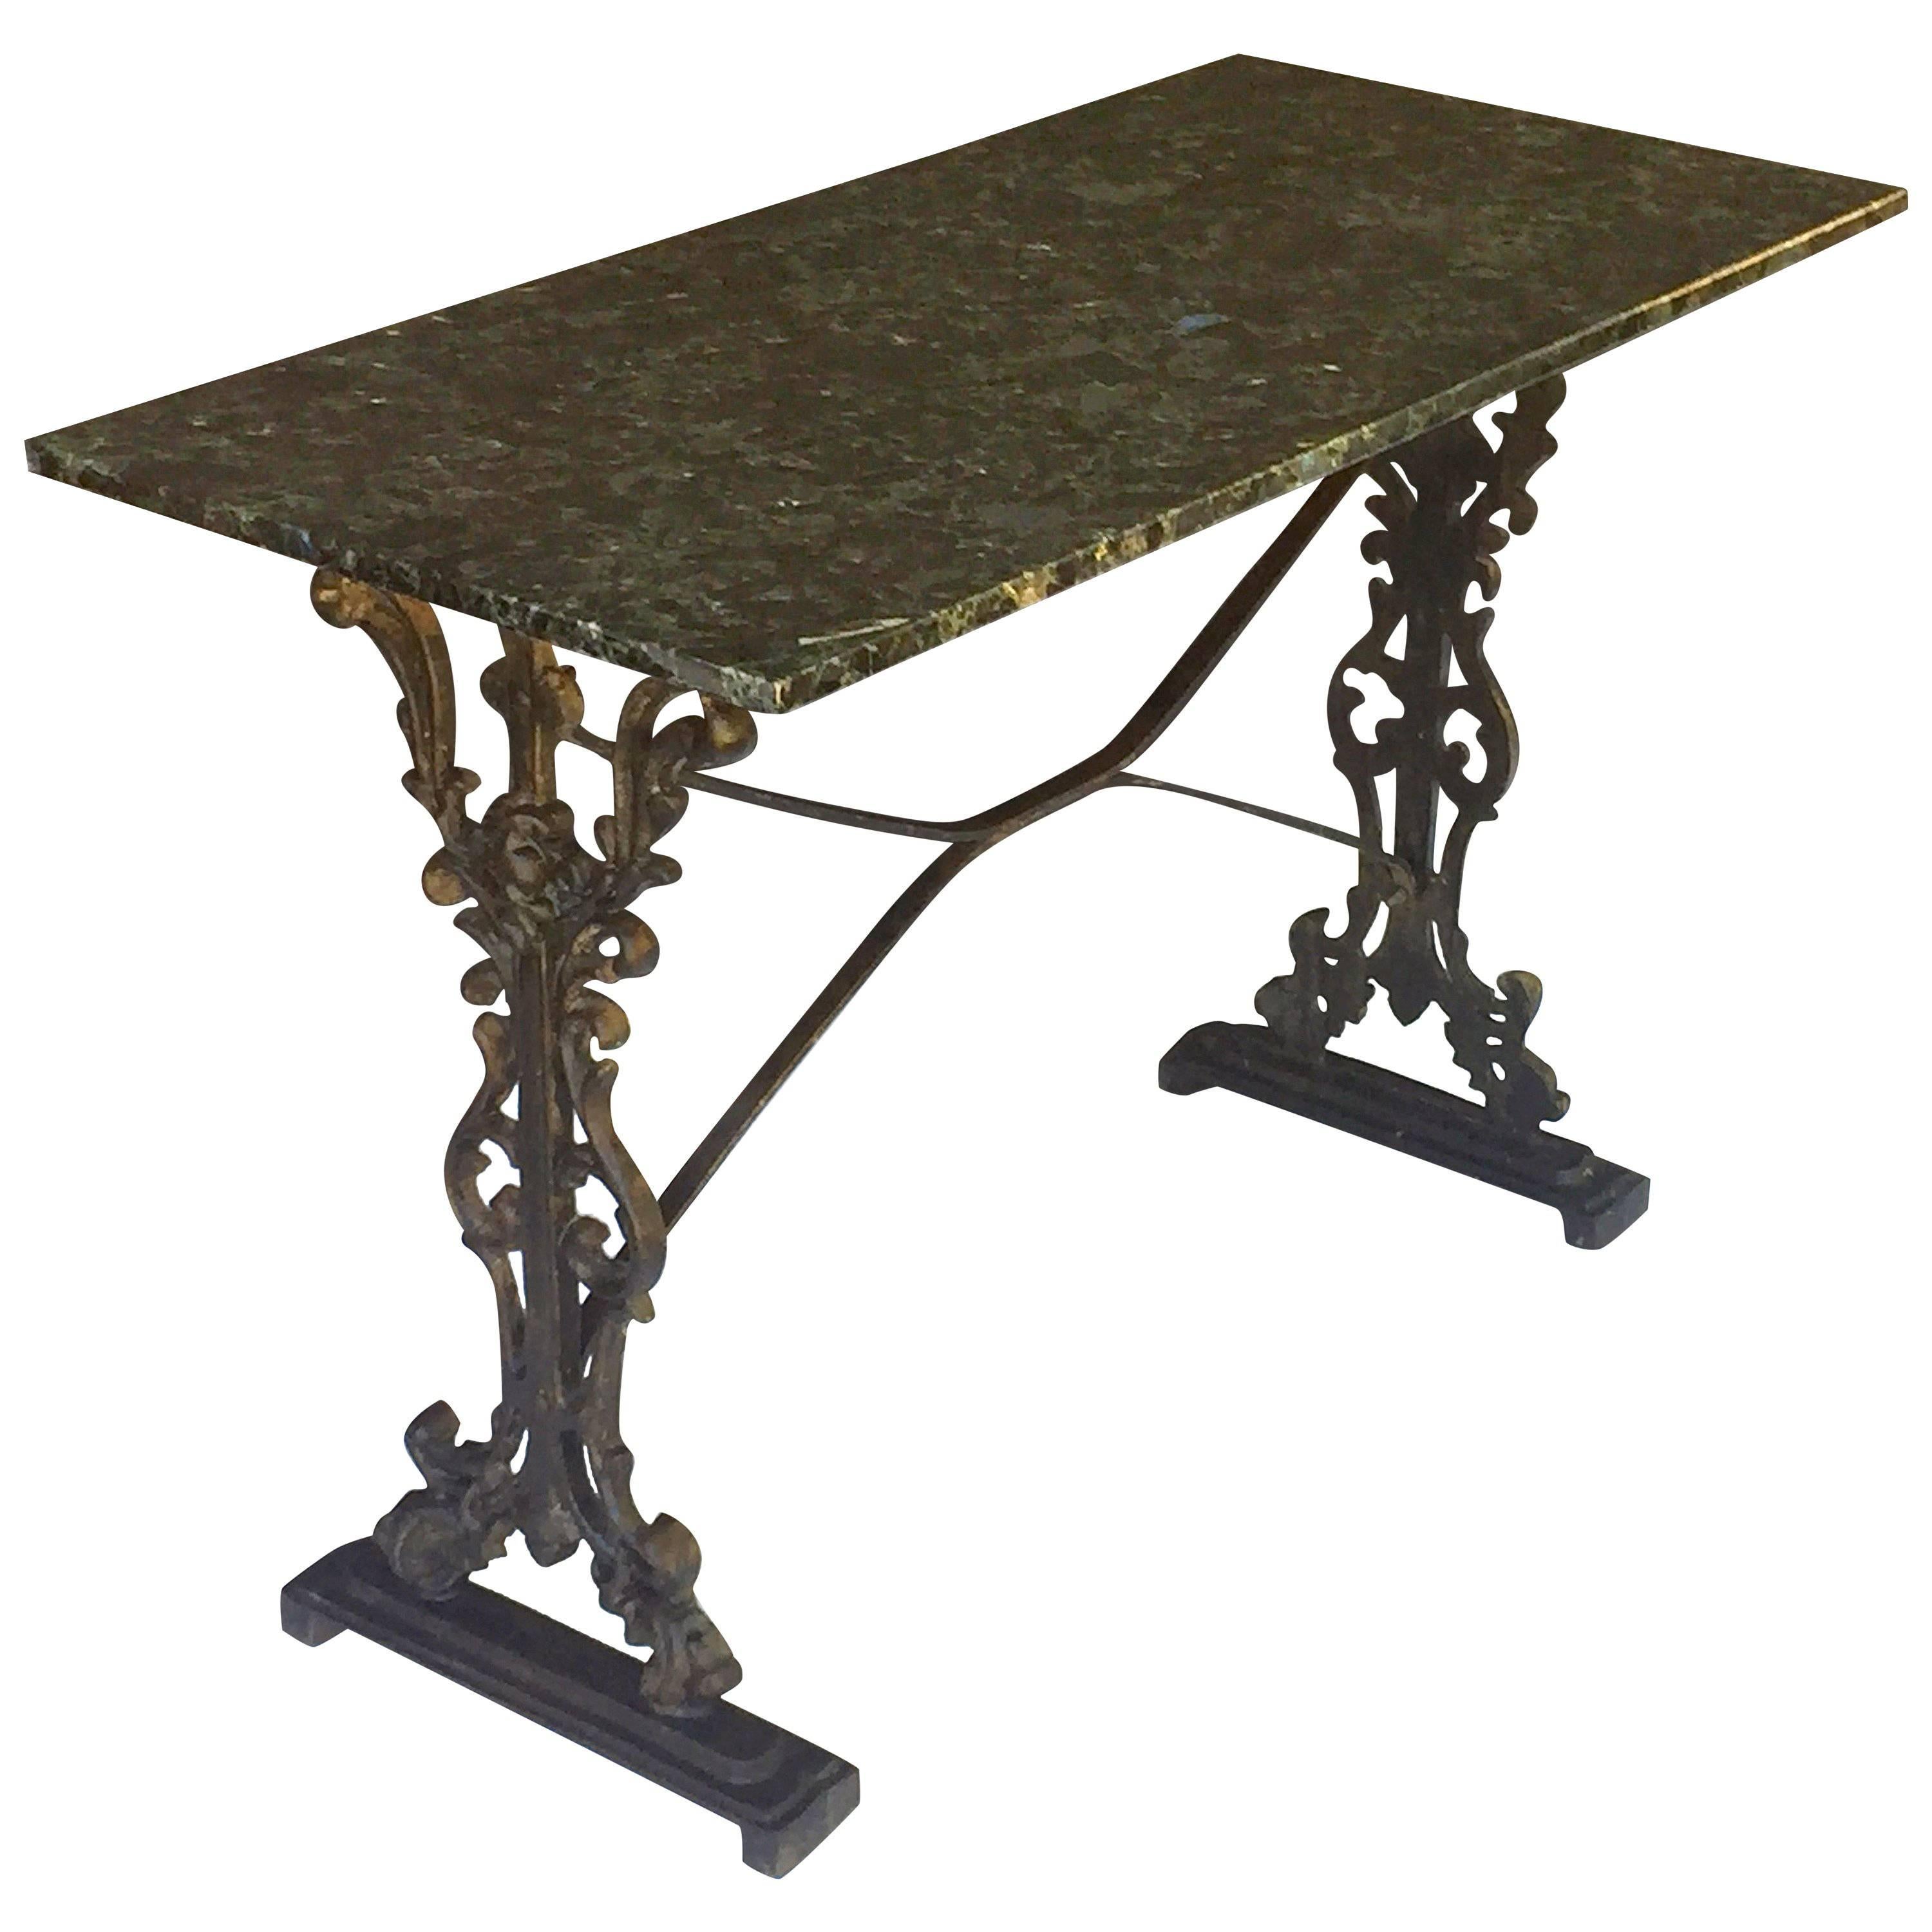 English Pub or Bistro Tables of Cast Iron with Granite Top (Pair Available)